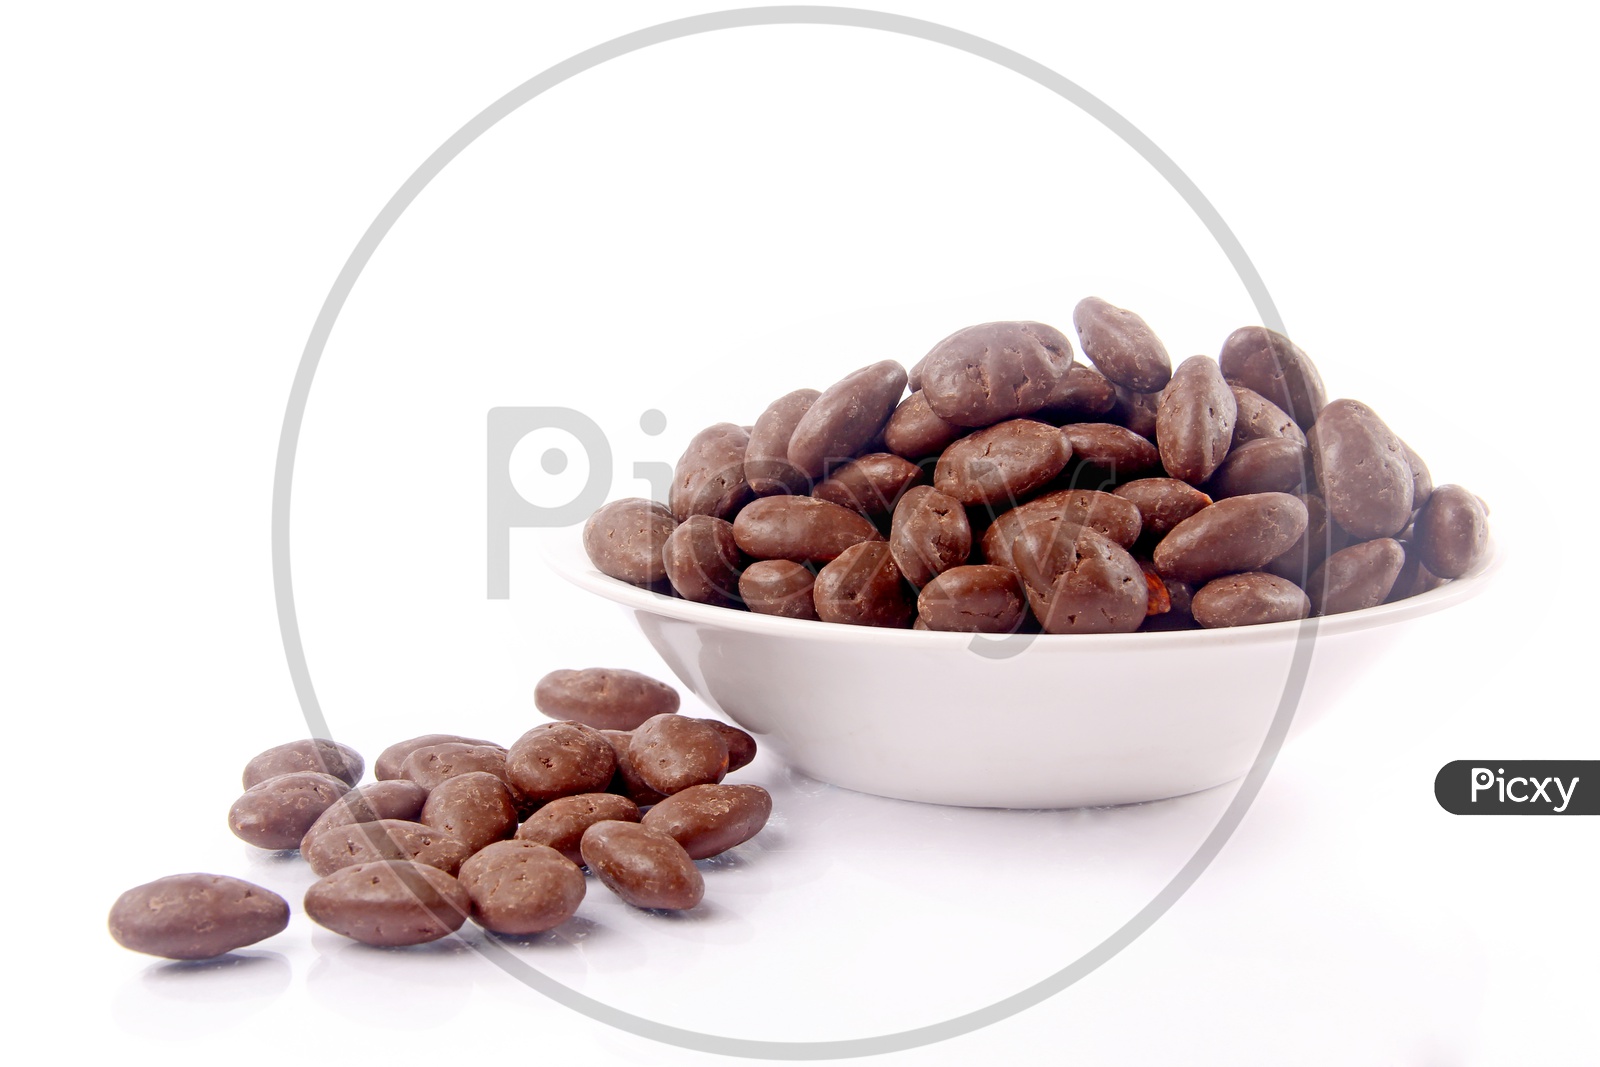 Chocolate Coated Almond Or Badam  in a Bowl On an Isolated White Background